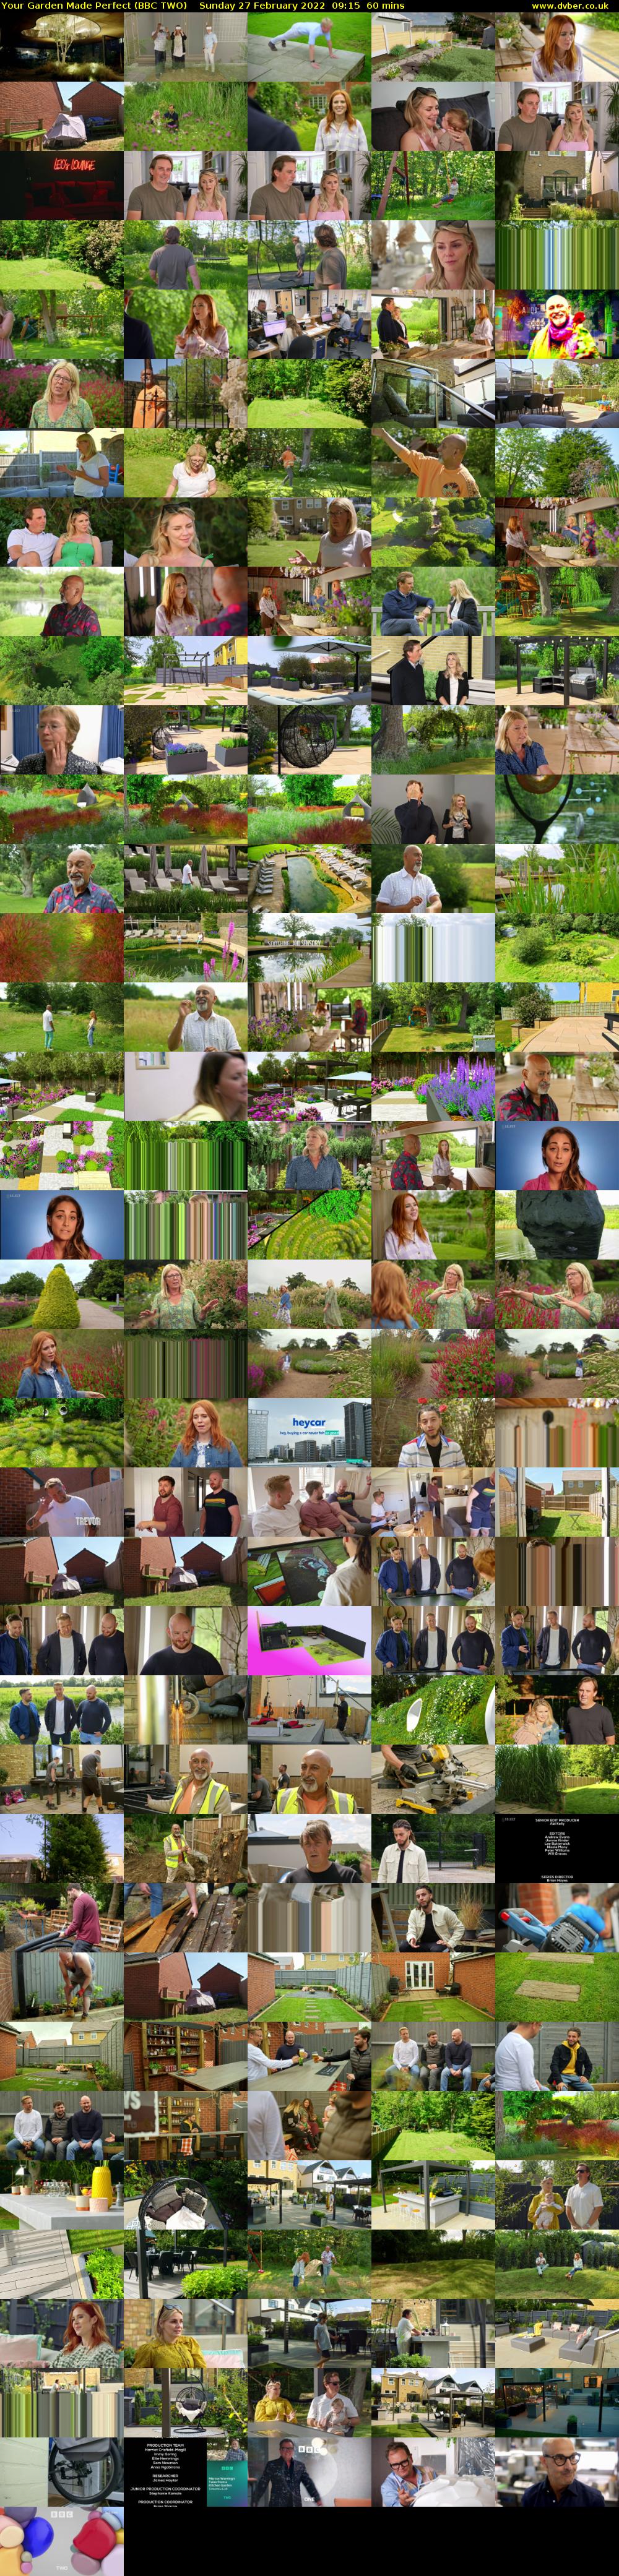 Your Garden Made Perfect (BBC TWO) Sunday 27 February 2022 09:15 - 10:15